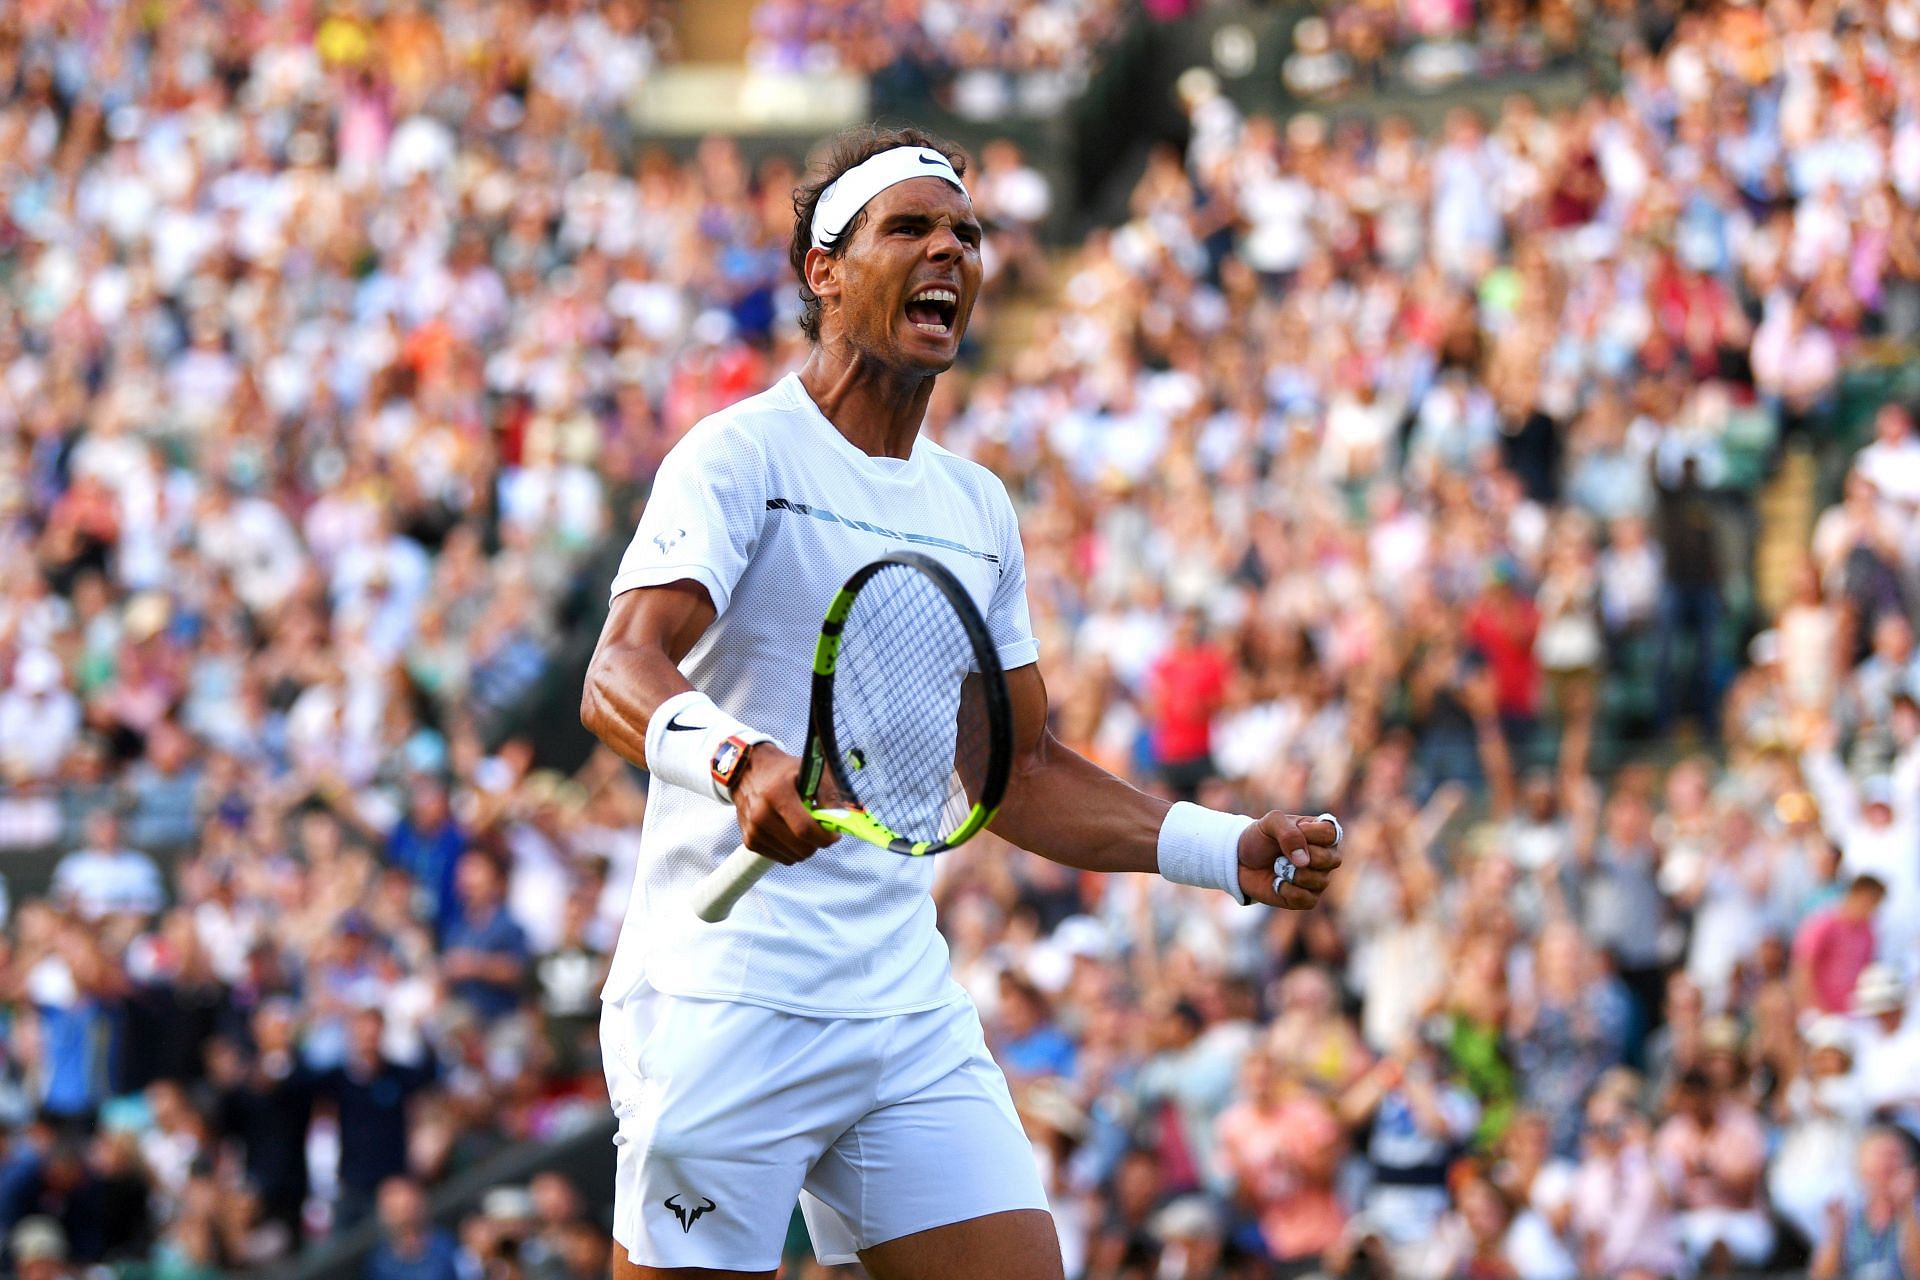 Rafael Nadal takes on Felix Auger-Aliassime in his second exhibition match